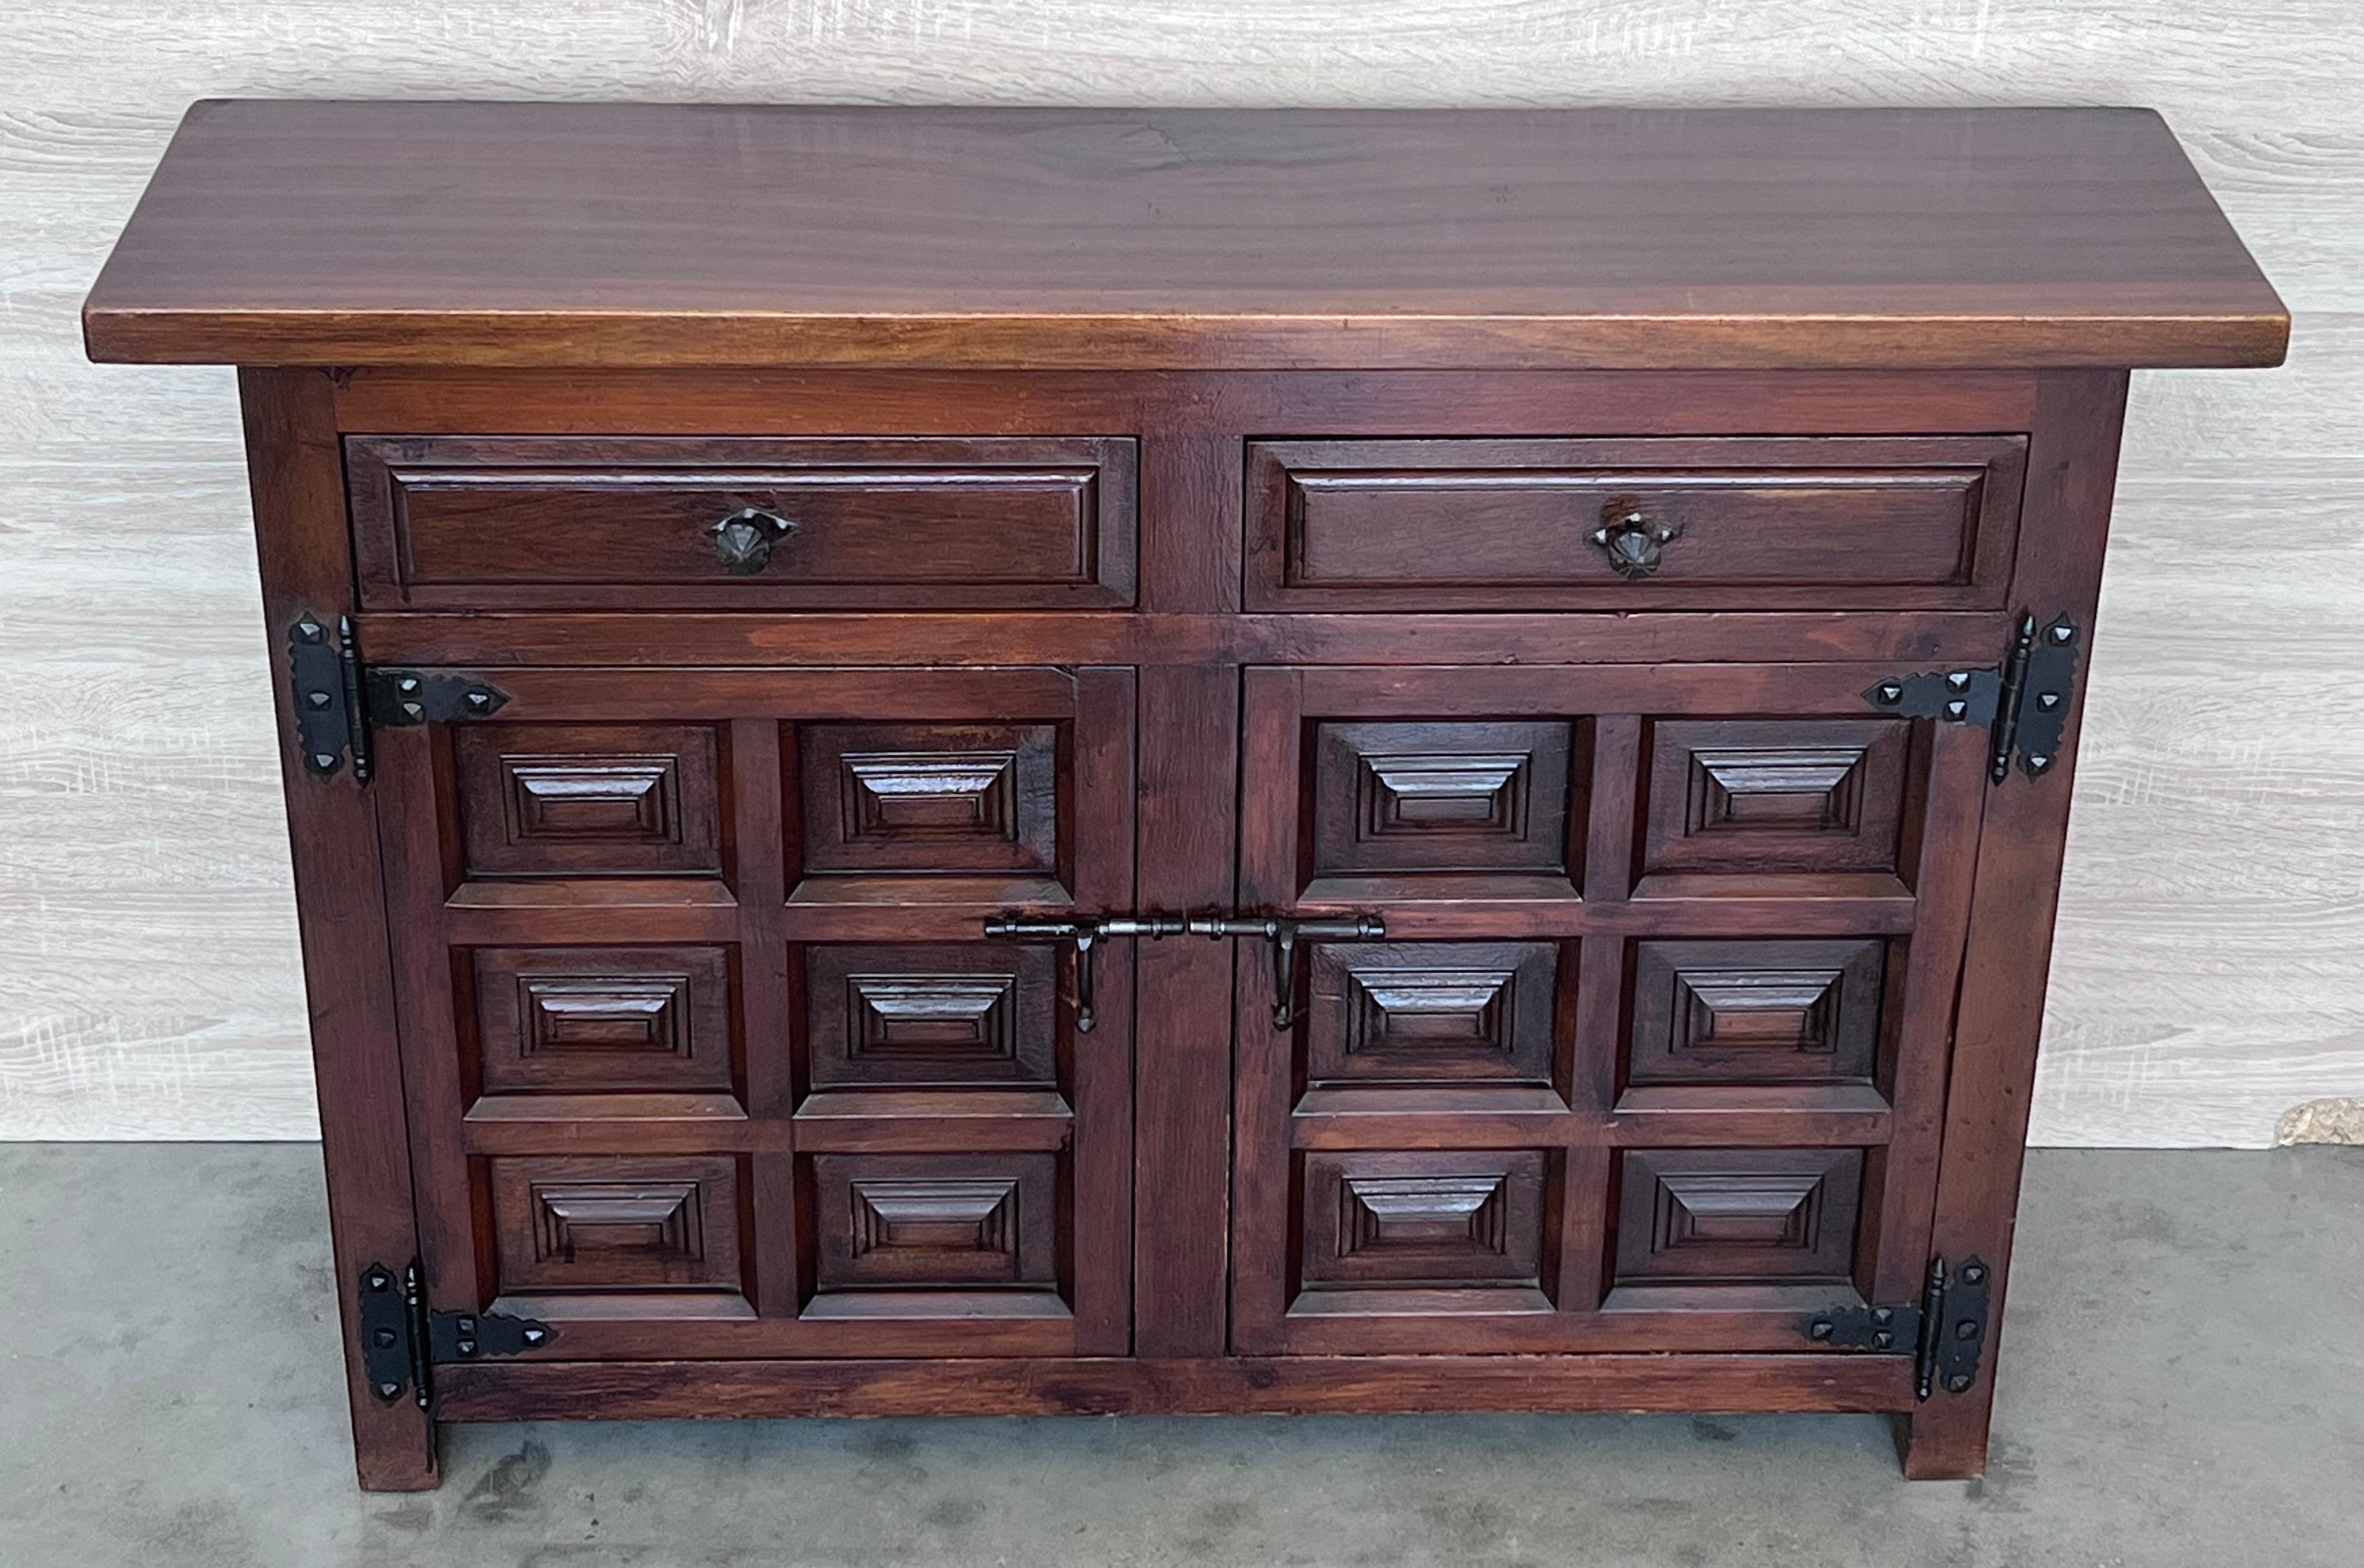 From Spain, constructed of solid walnut, the rectangular top without edge top, conforming case housing two carved drawers with two doors paneled with solid walnut, raised on a plinth base.
Very heavy and original cabinet.

WE WILL RESTORE THE